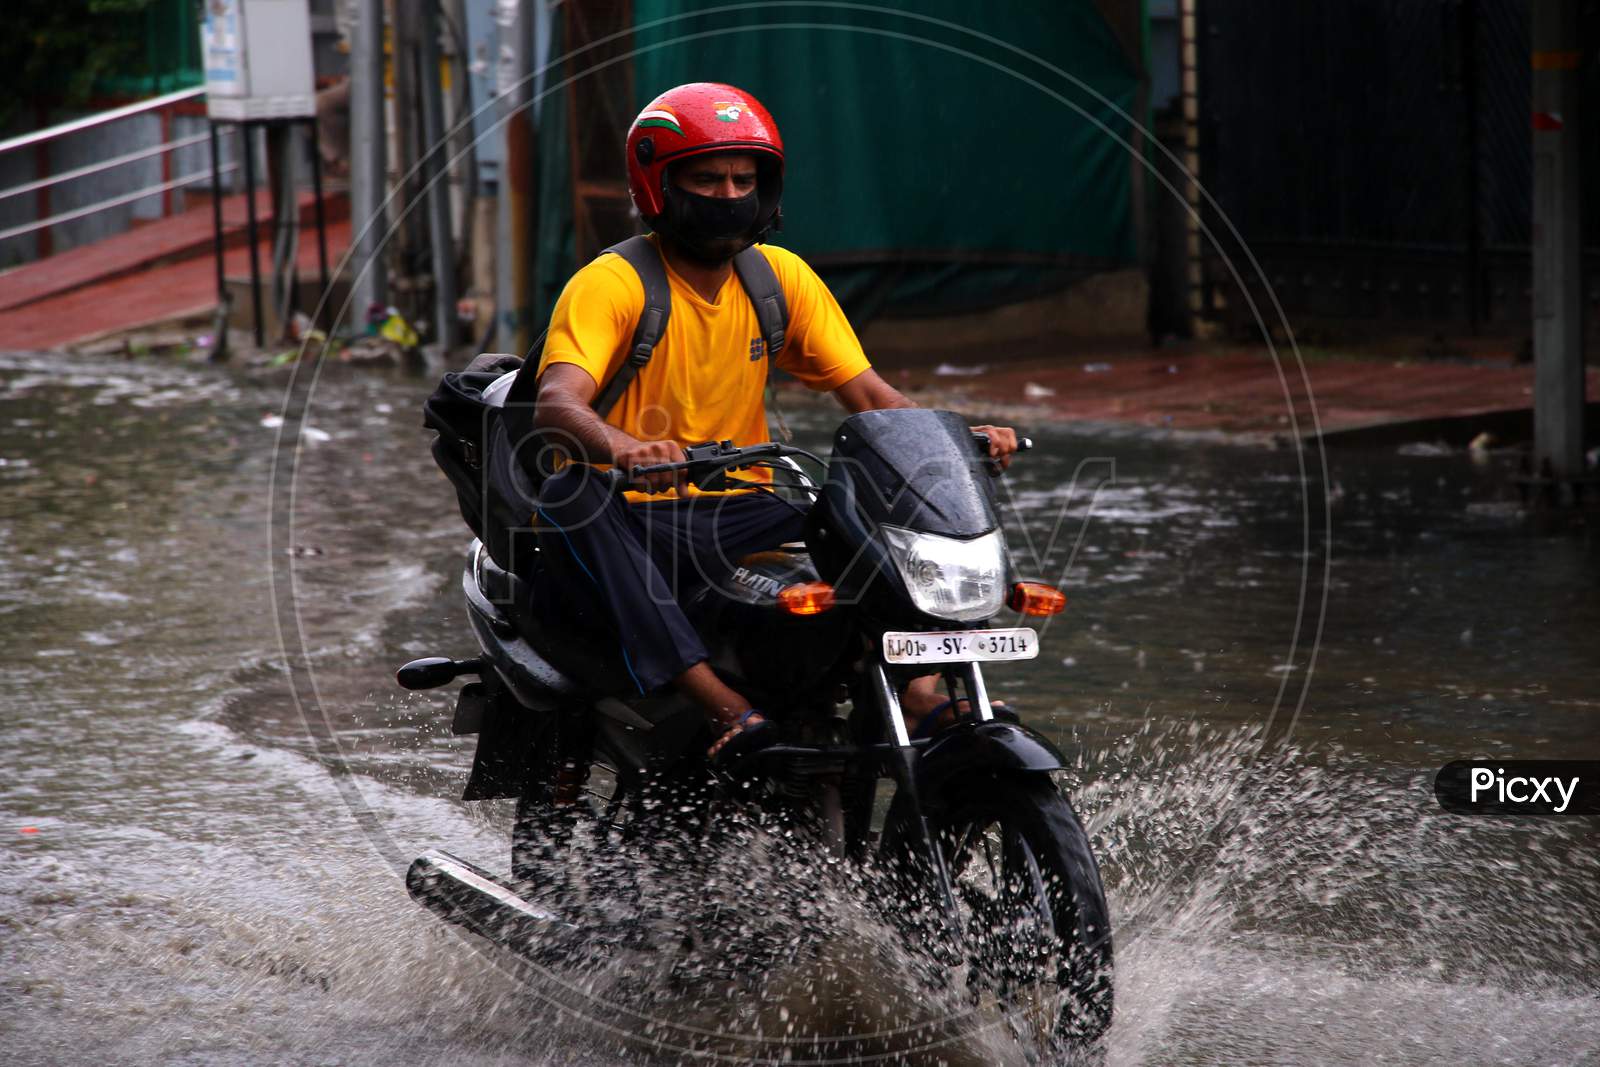 A Bike Rider On A Waterlogged Road During Rain, In Ajmer, Rajasthan, India On 04 June 2020.